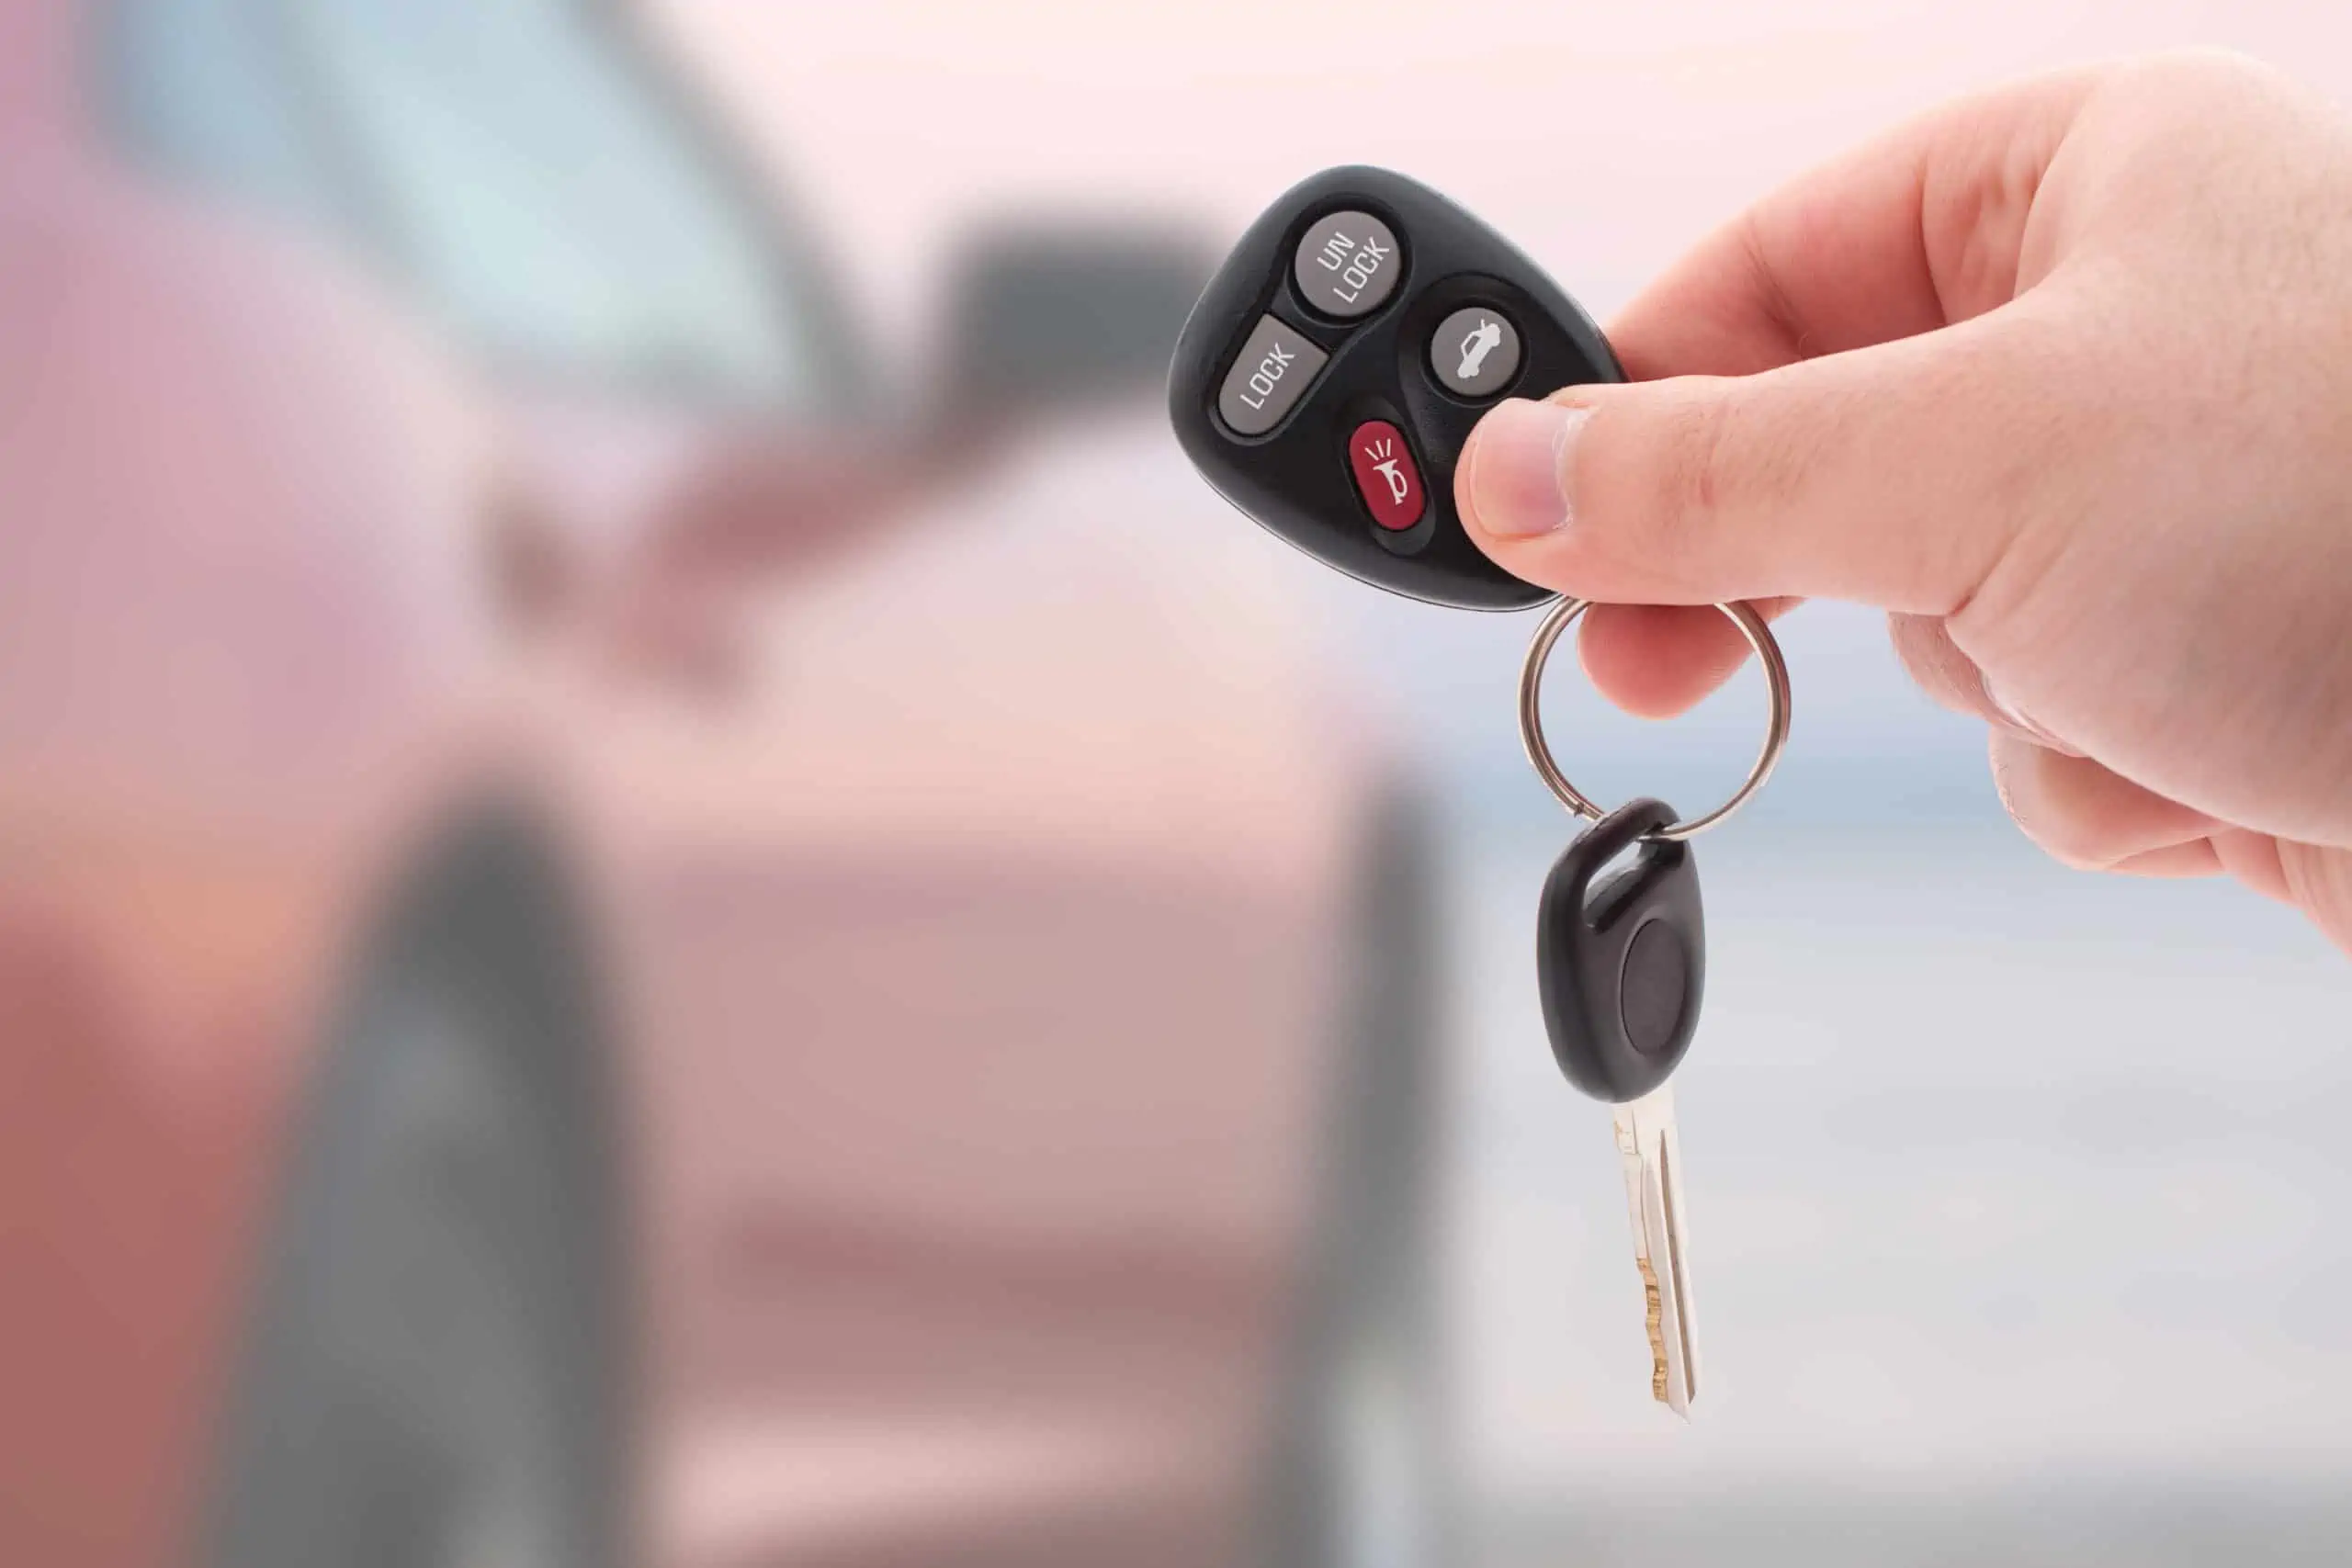 Hand holding keyring with car key and car keyfob in front of a blurred car.